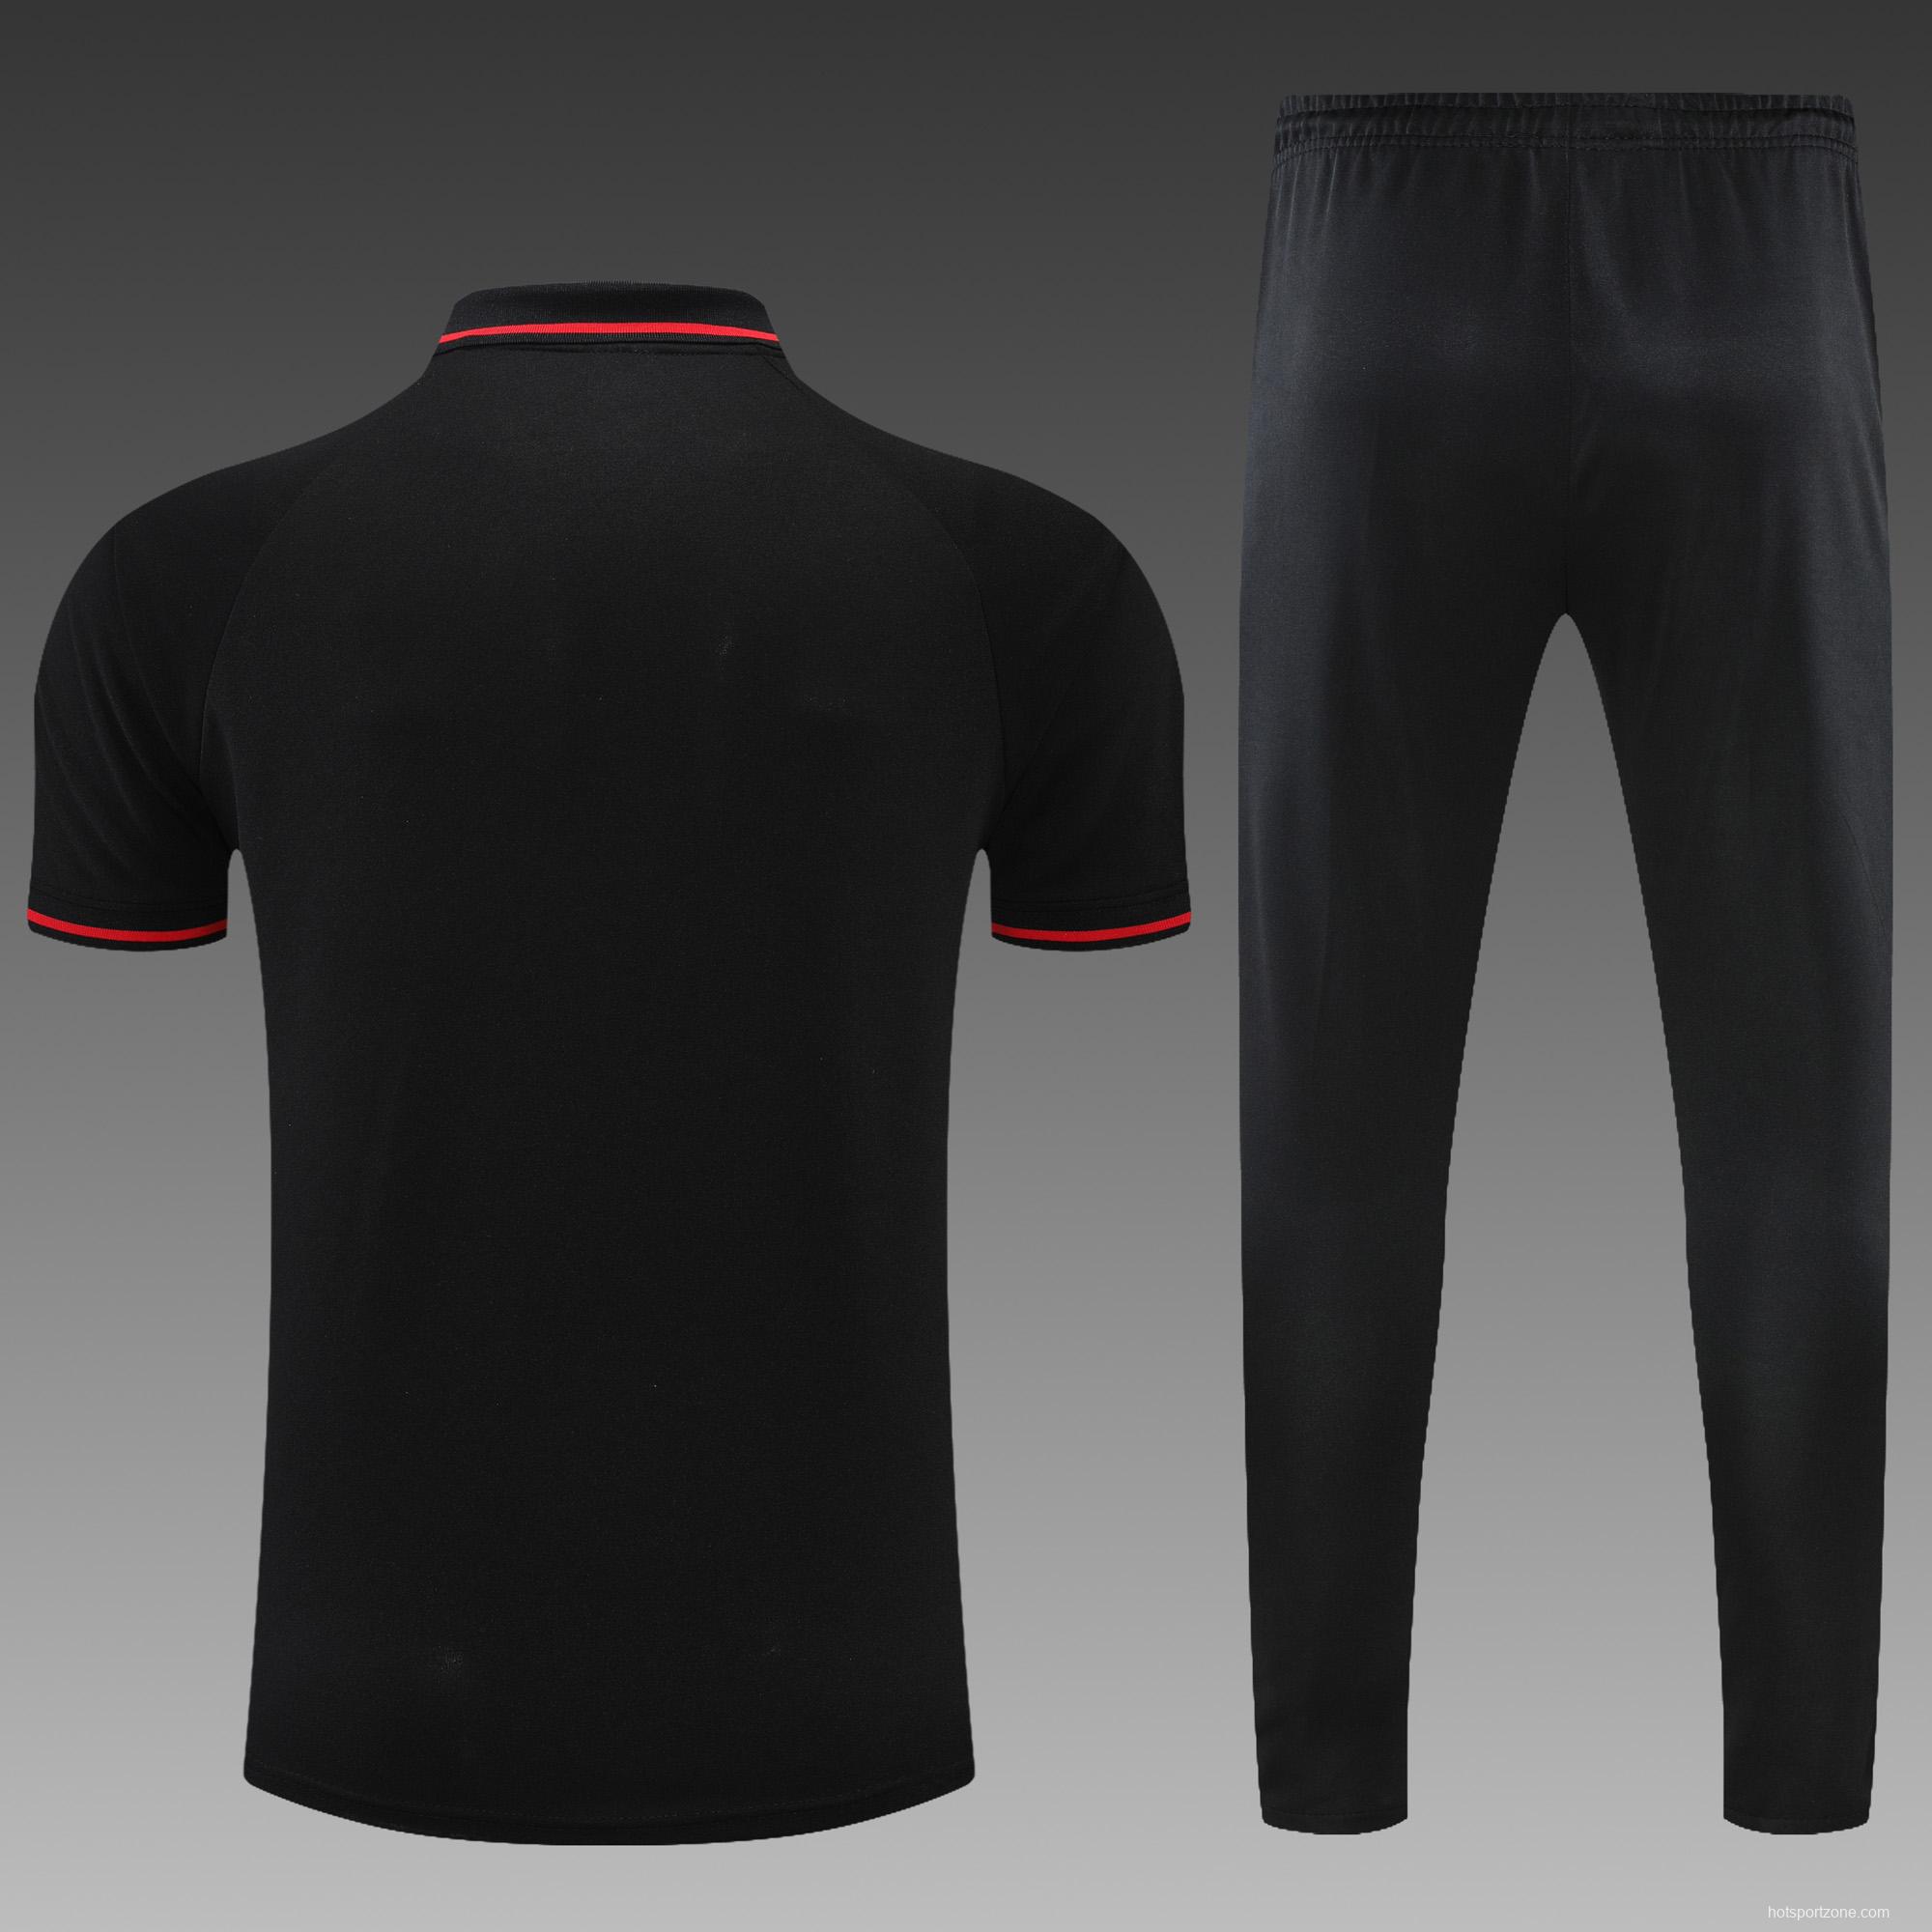 AFC Ajax POLO kit Black (not supported to be sold separately)